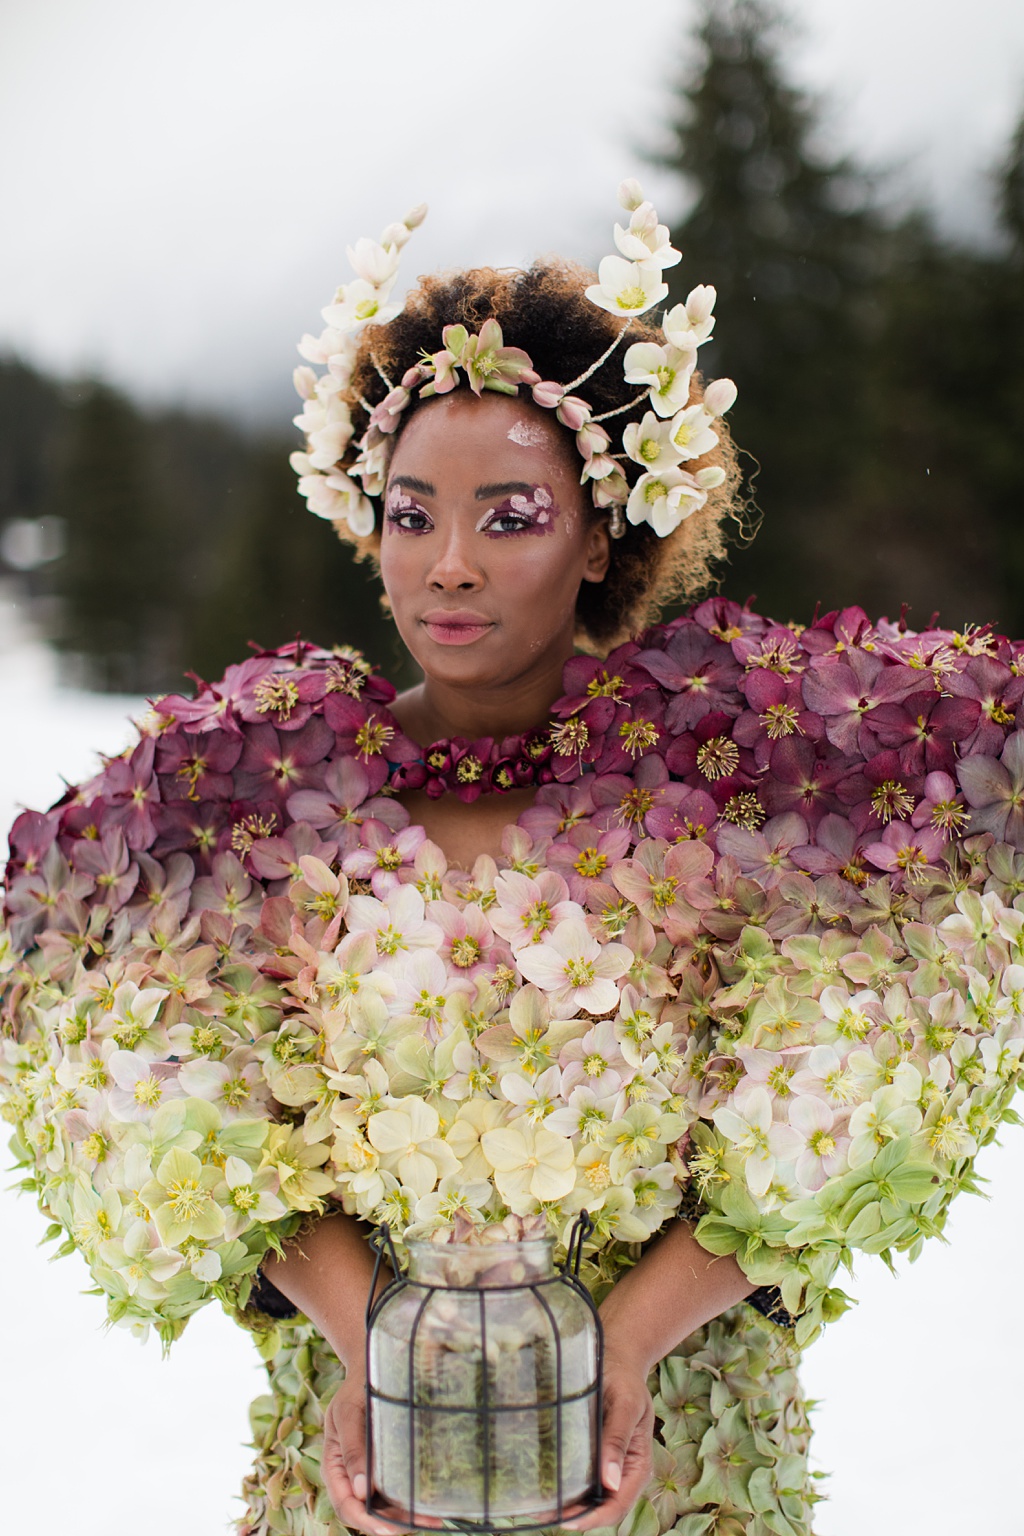 A bespoke flower dress made of hellebores, with model holding lantern